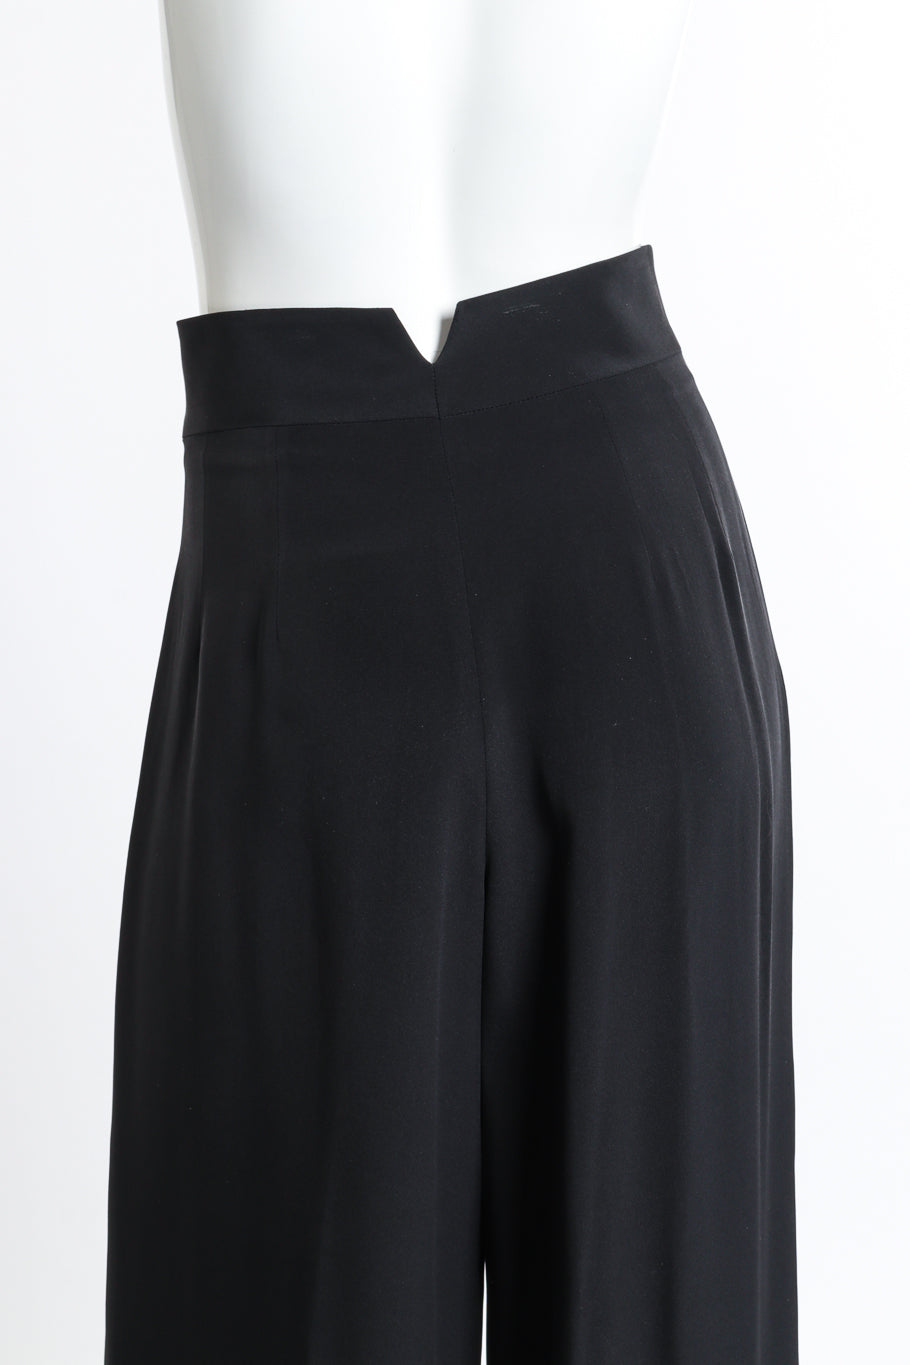 Vintage Richard Tyler wide leg high waisted black pants close up detail of the V cut in the waistband rear view as worn on mannequin @RECESS LA